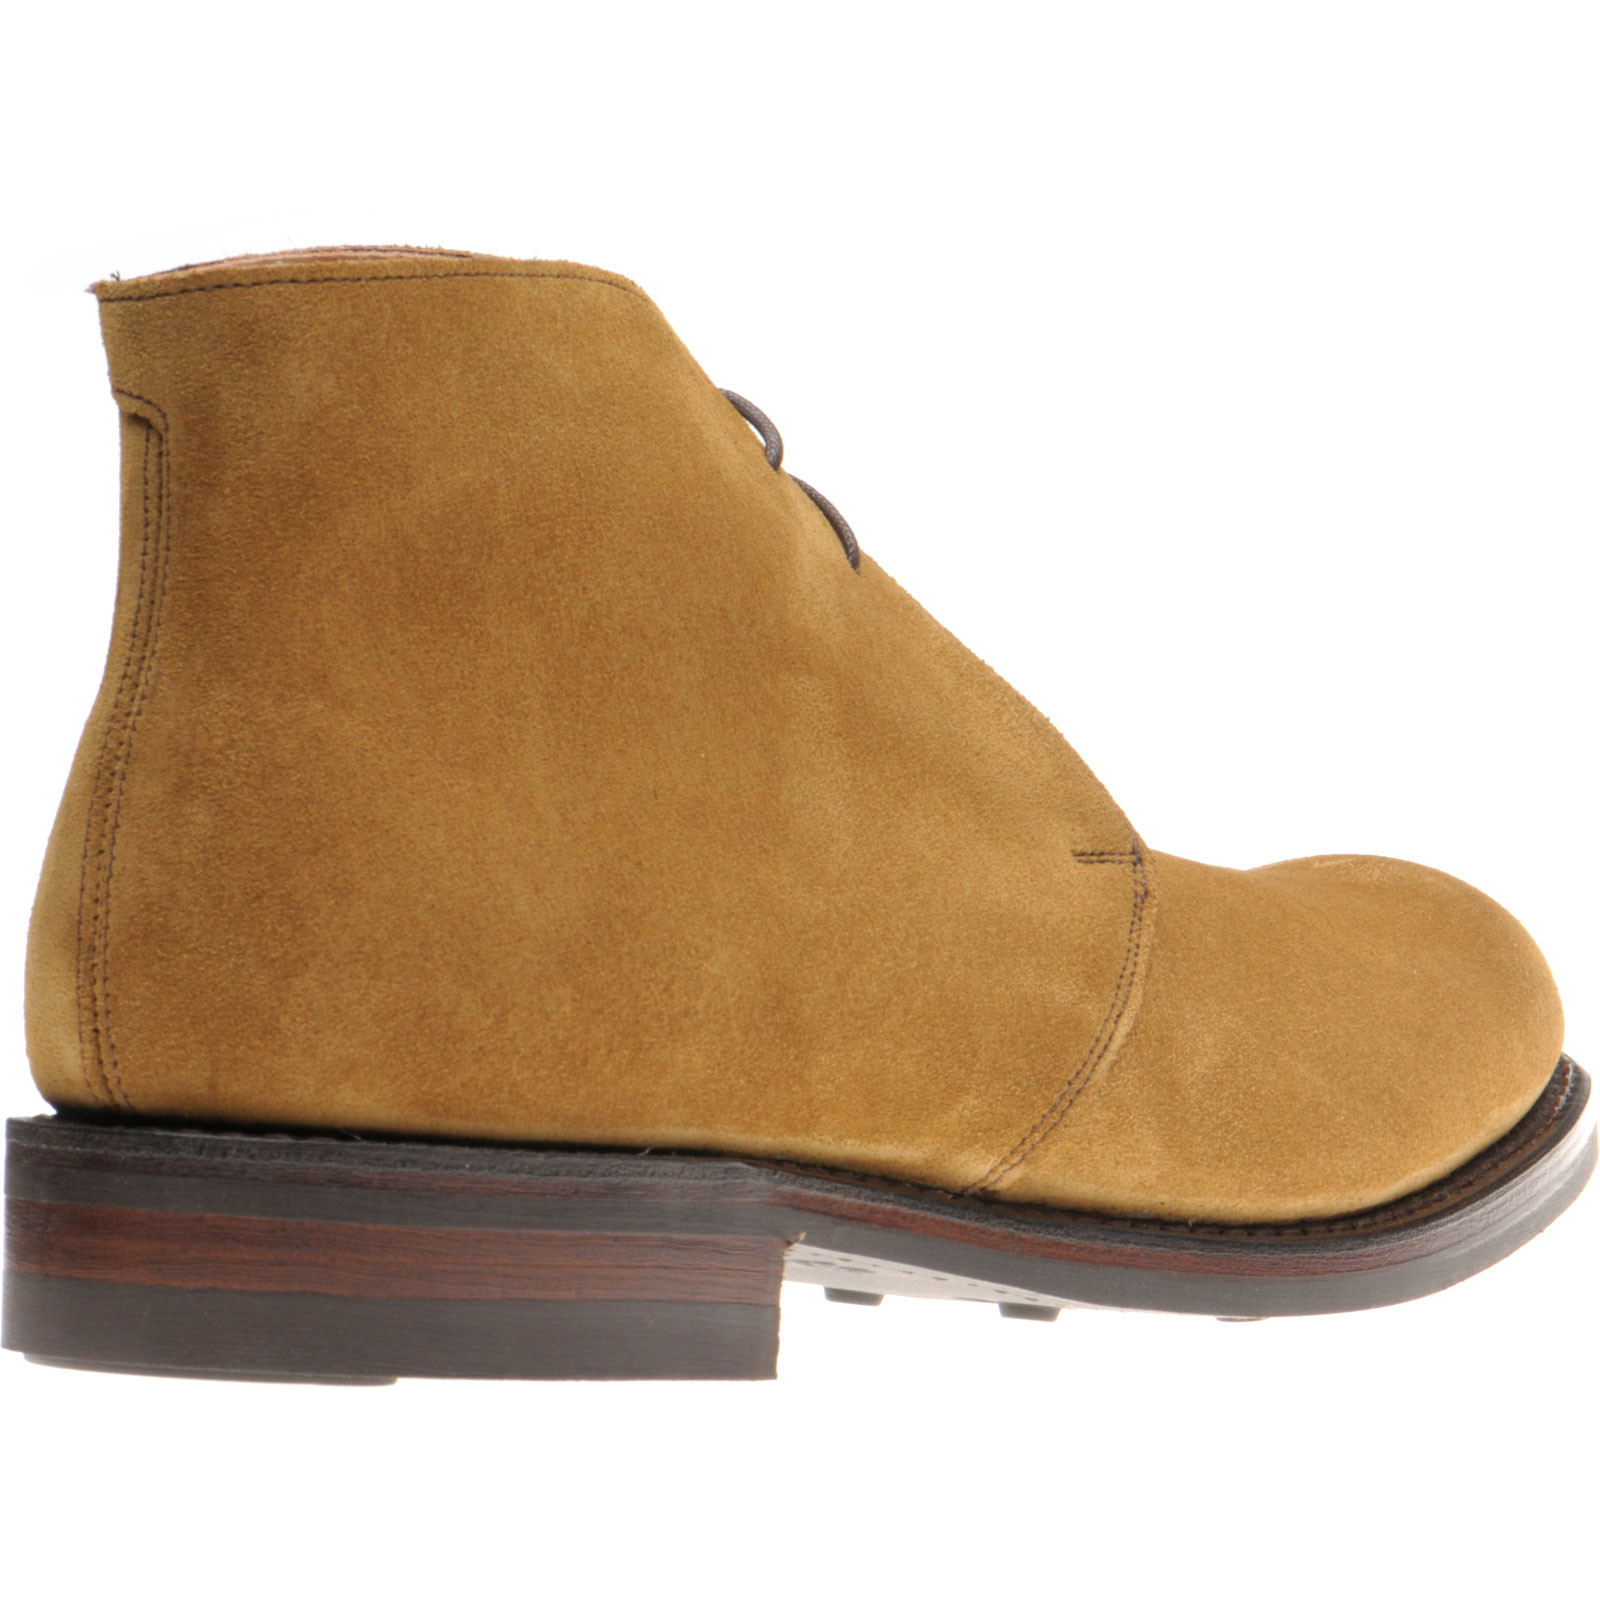 Herring shoes | Herring Premier | Herald rubber-soled Chukka boots in ...